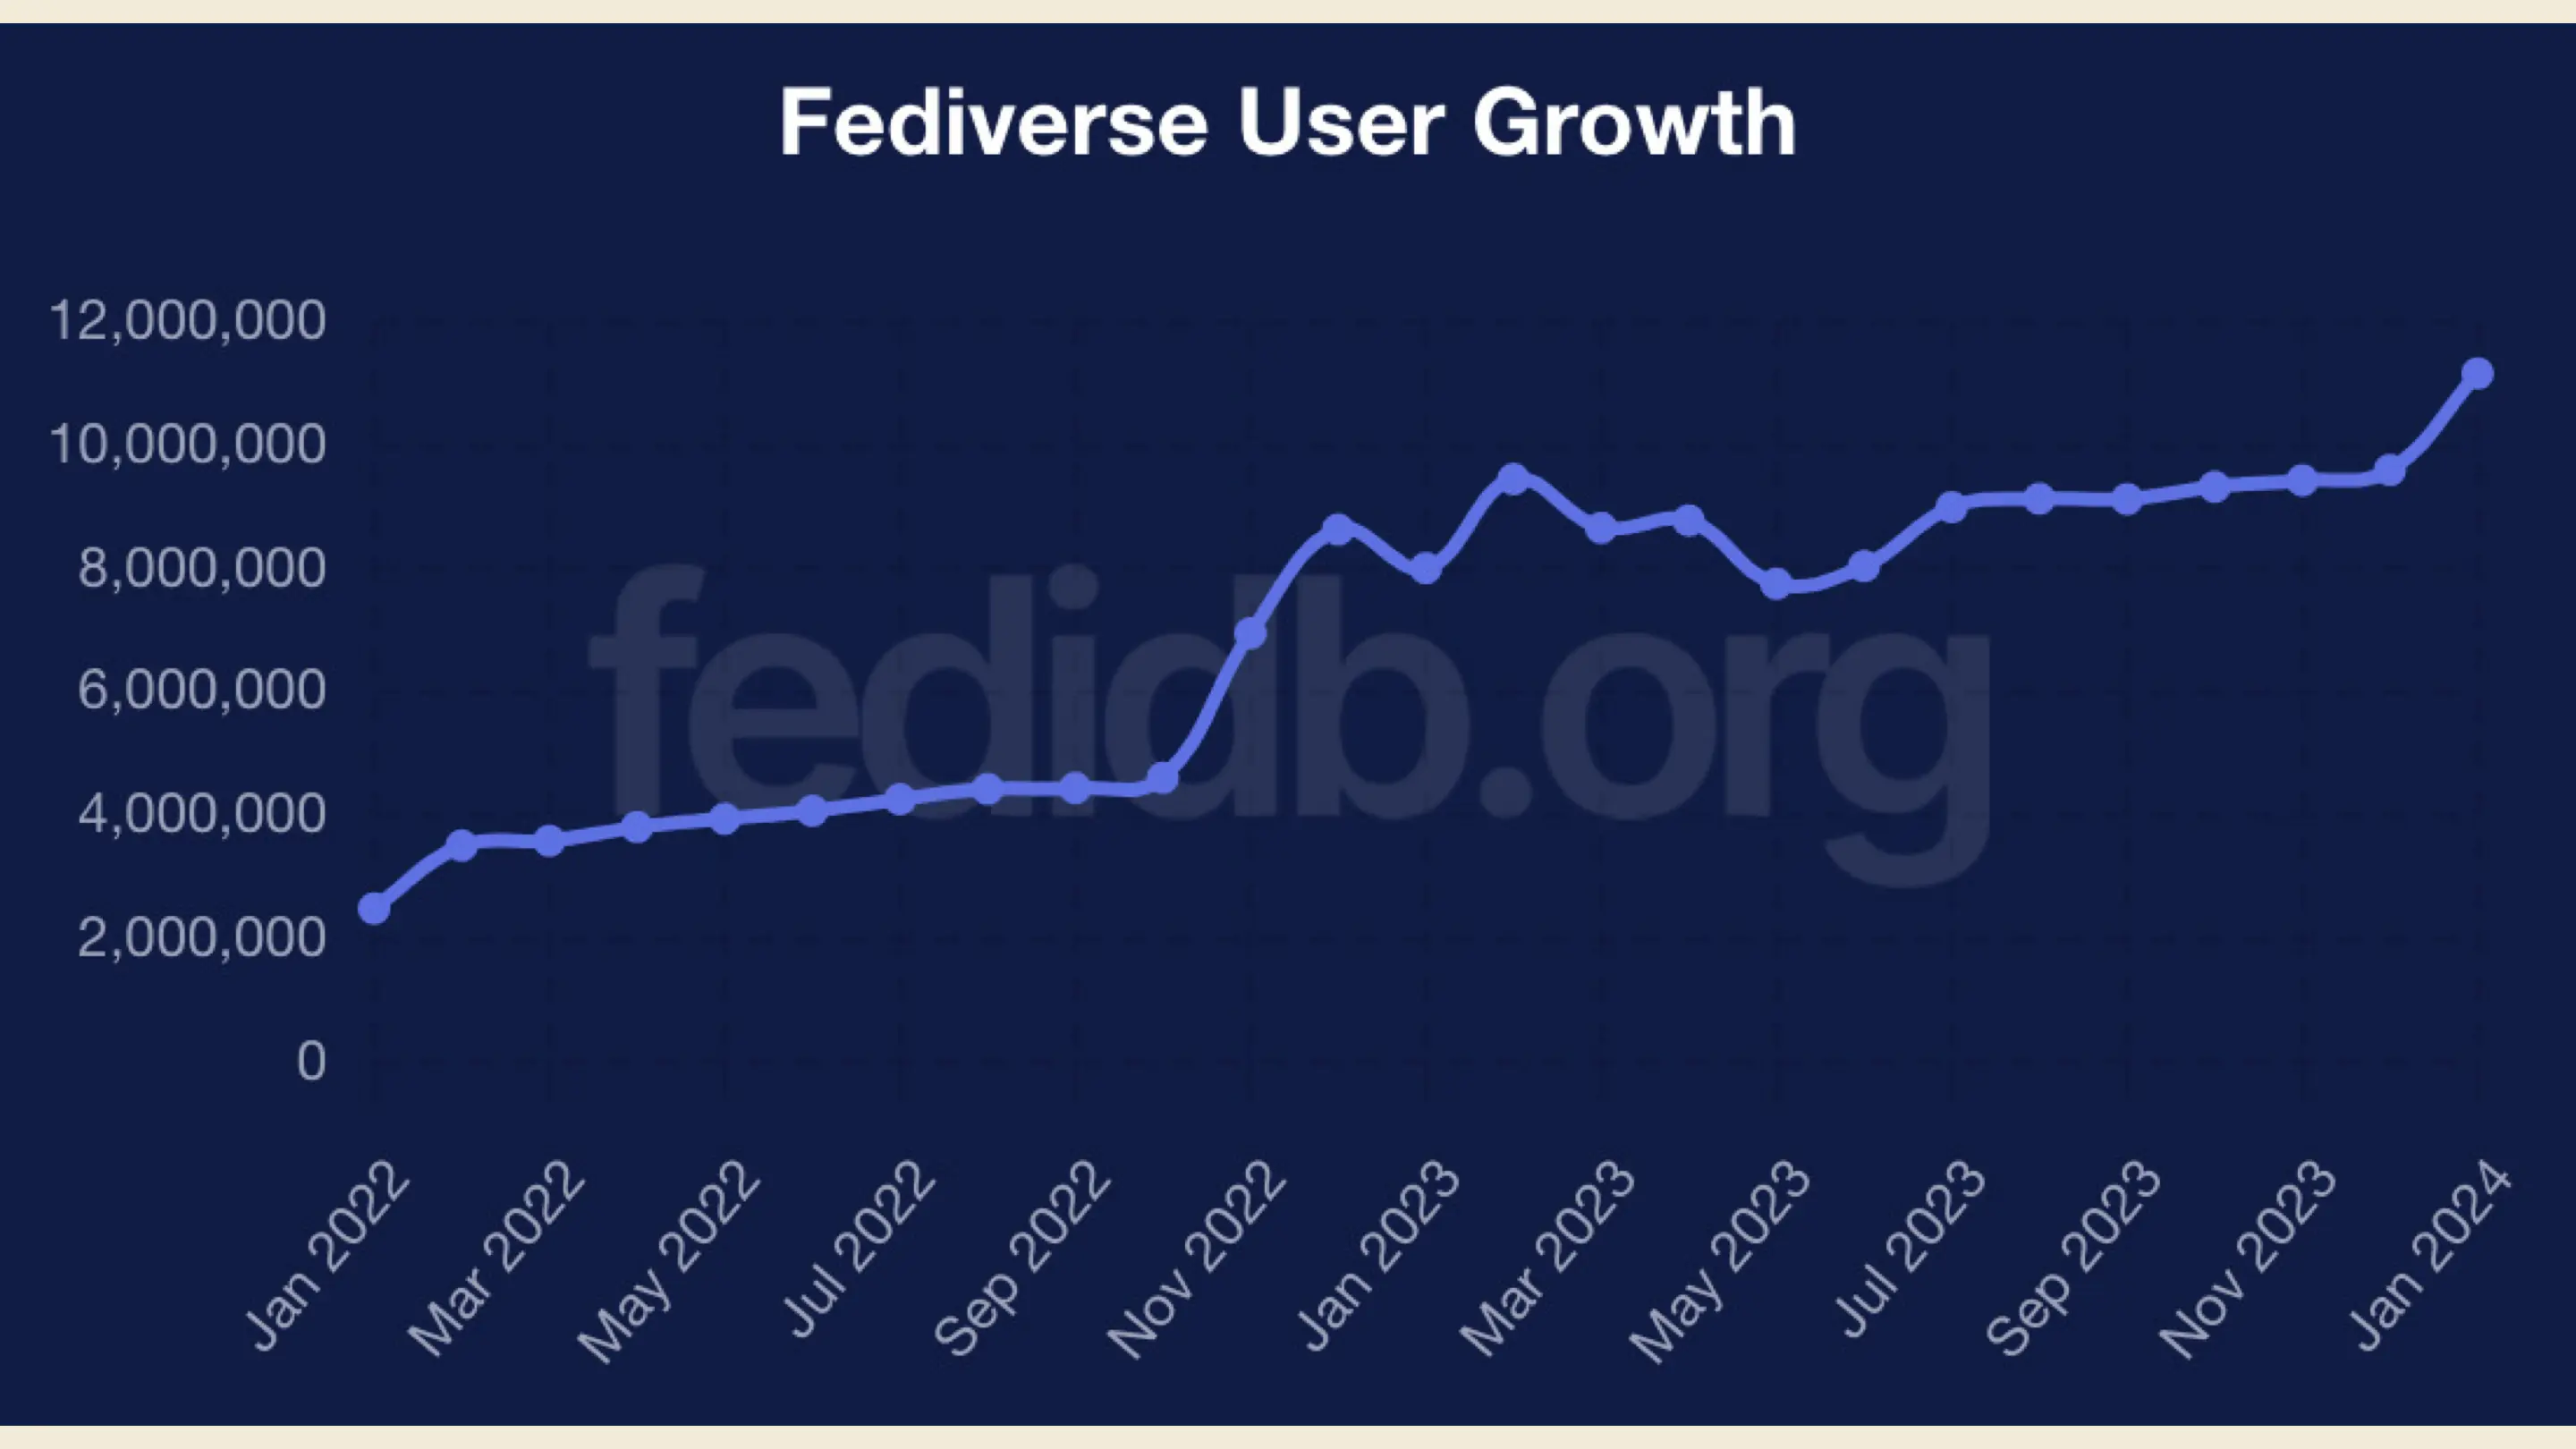 Graph showing fediverse user growth increasing monthly from 2 million to almost 12 million people over 2 years